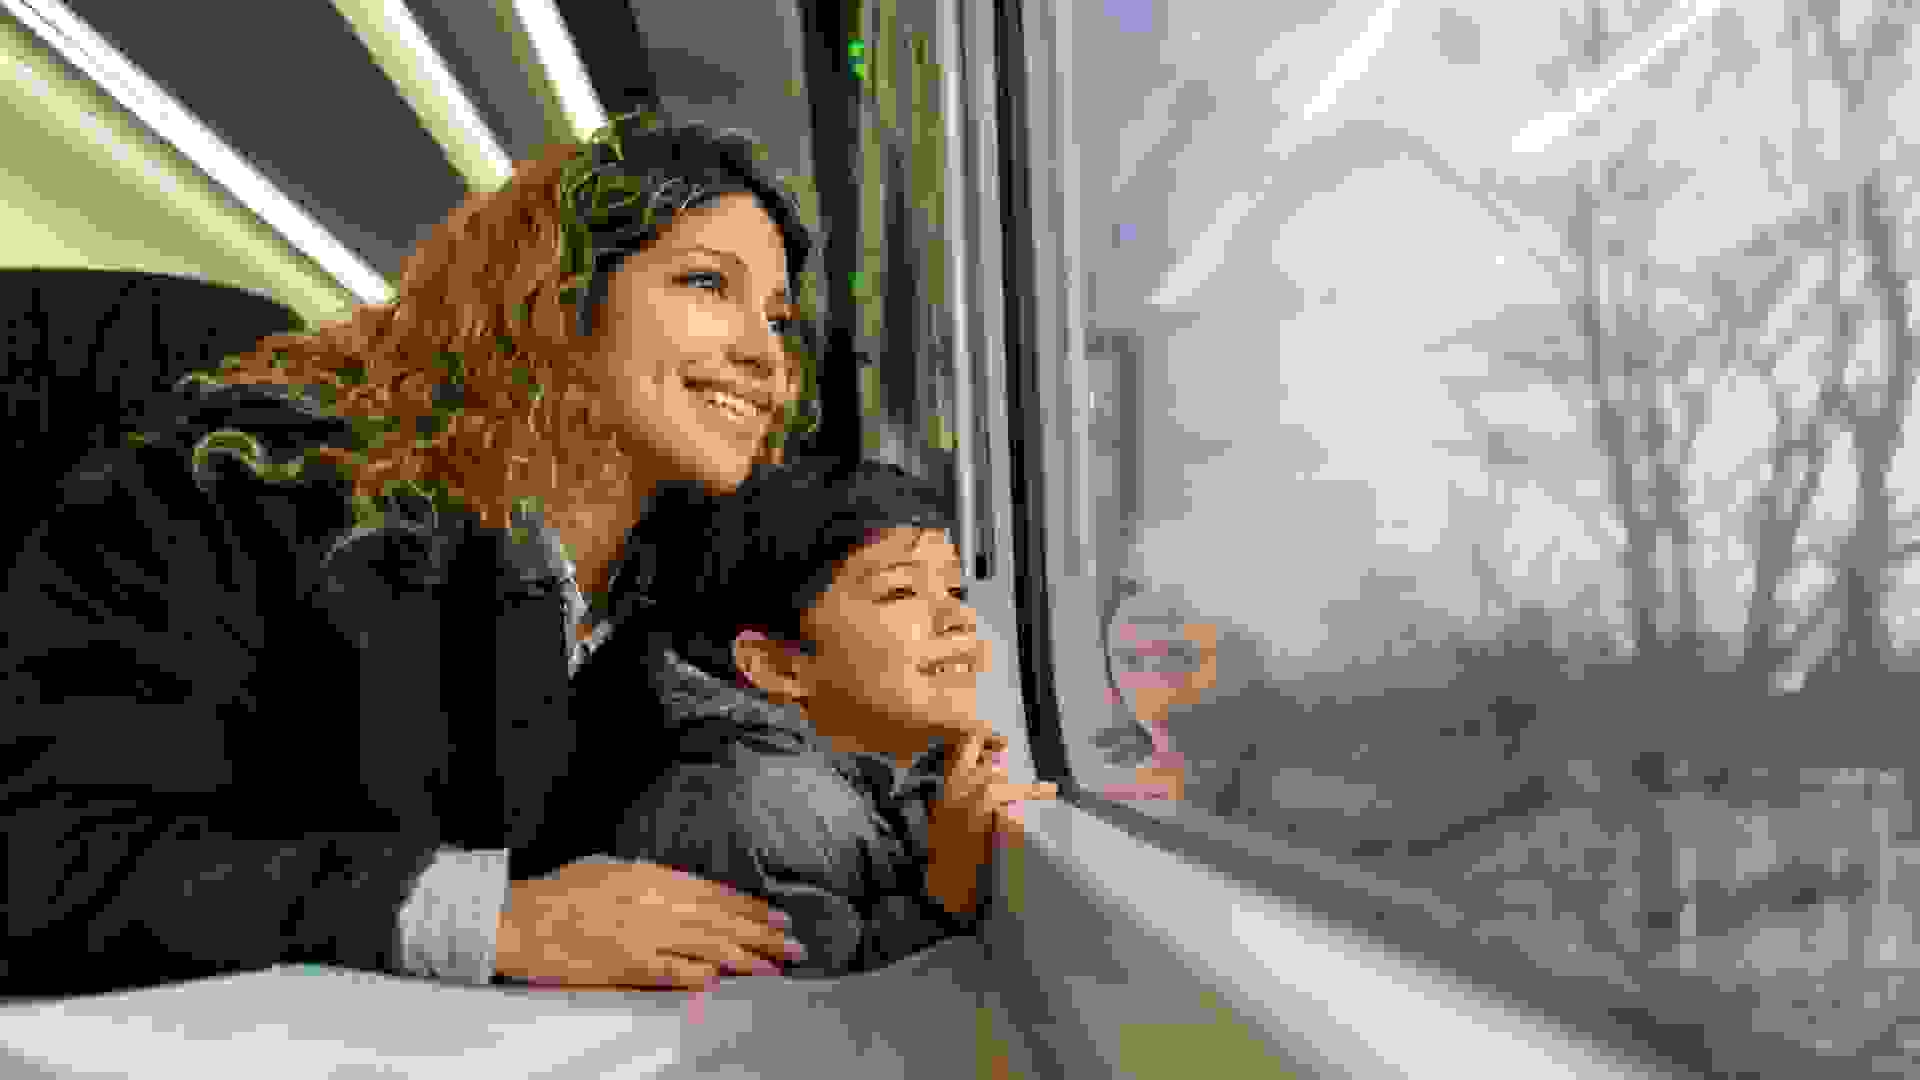 Happy single mother and son looking at the window view both smiling while traveling by train - Lifestyles .